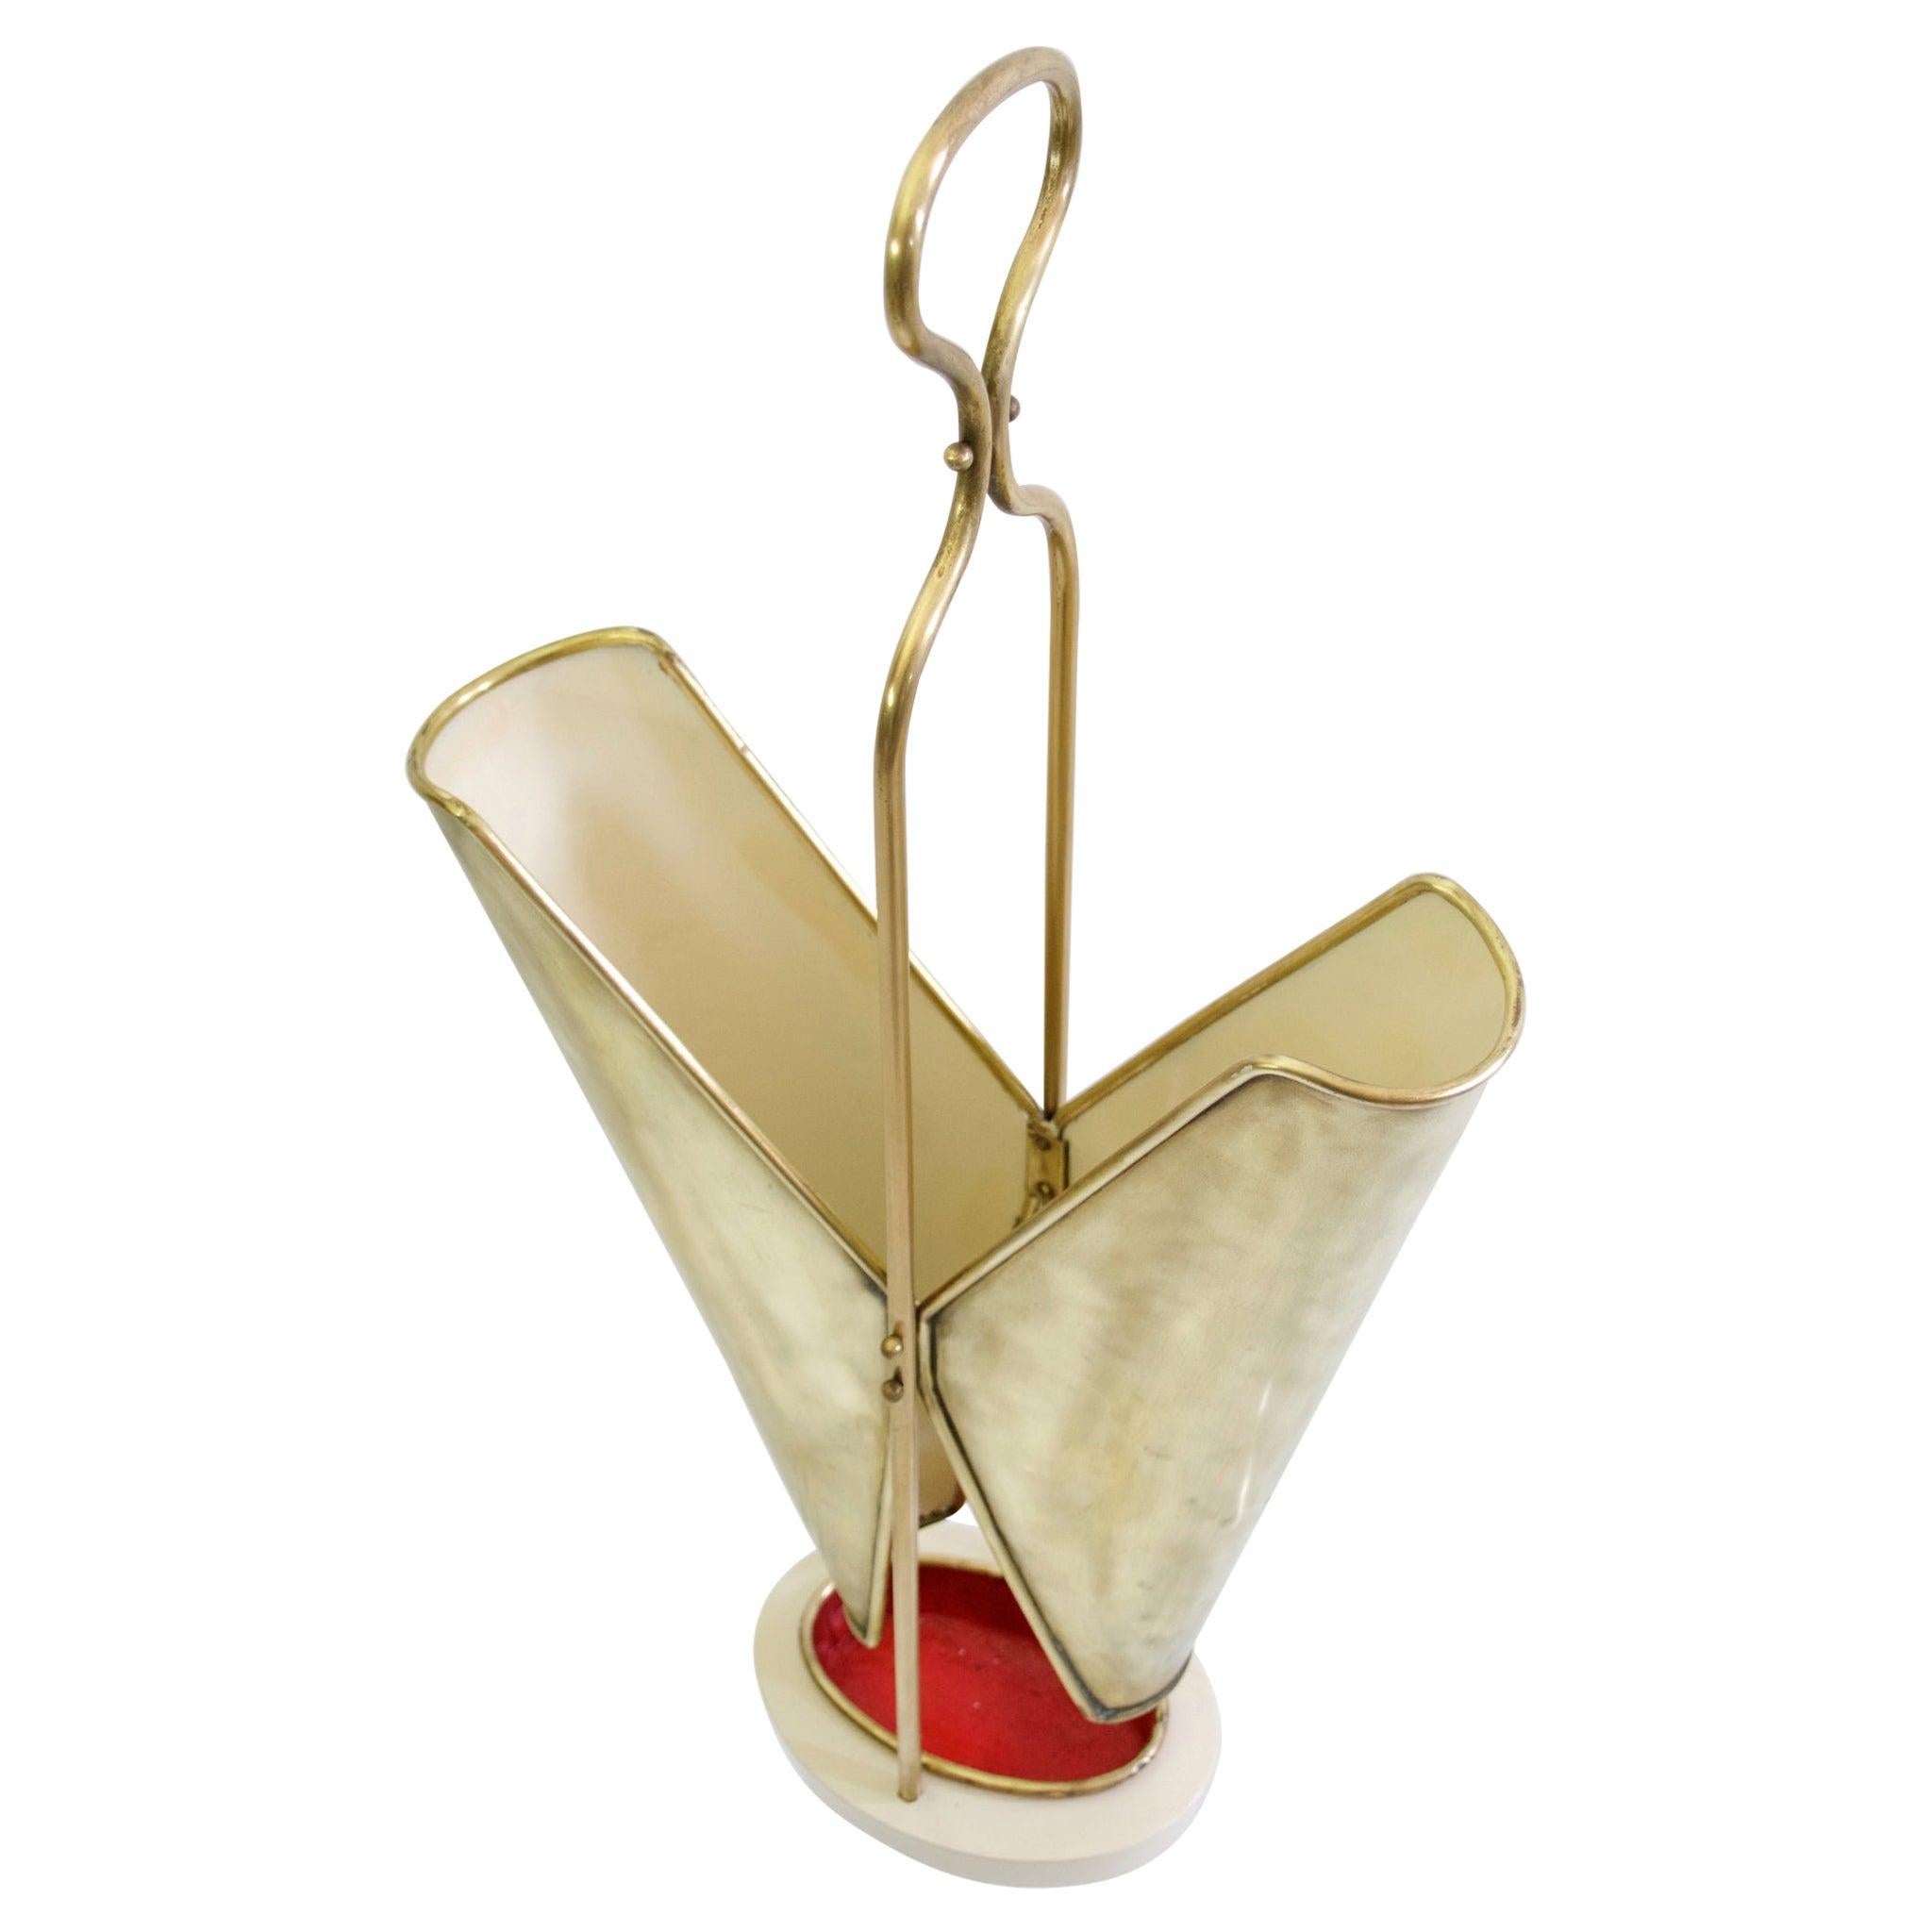 Super elegant umbrella stand in brass with the inside painted white, standing on an iron base. The water cup is in original condition painted red inside.